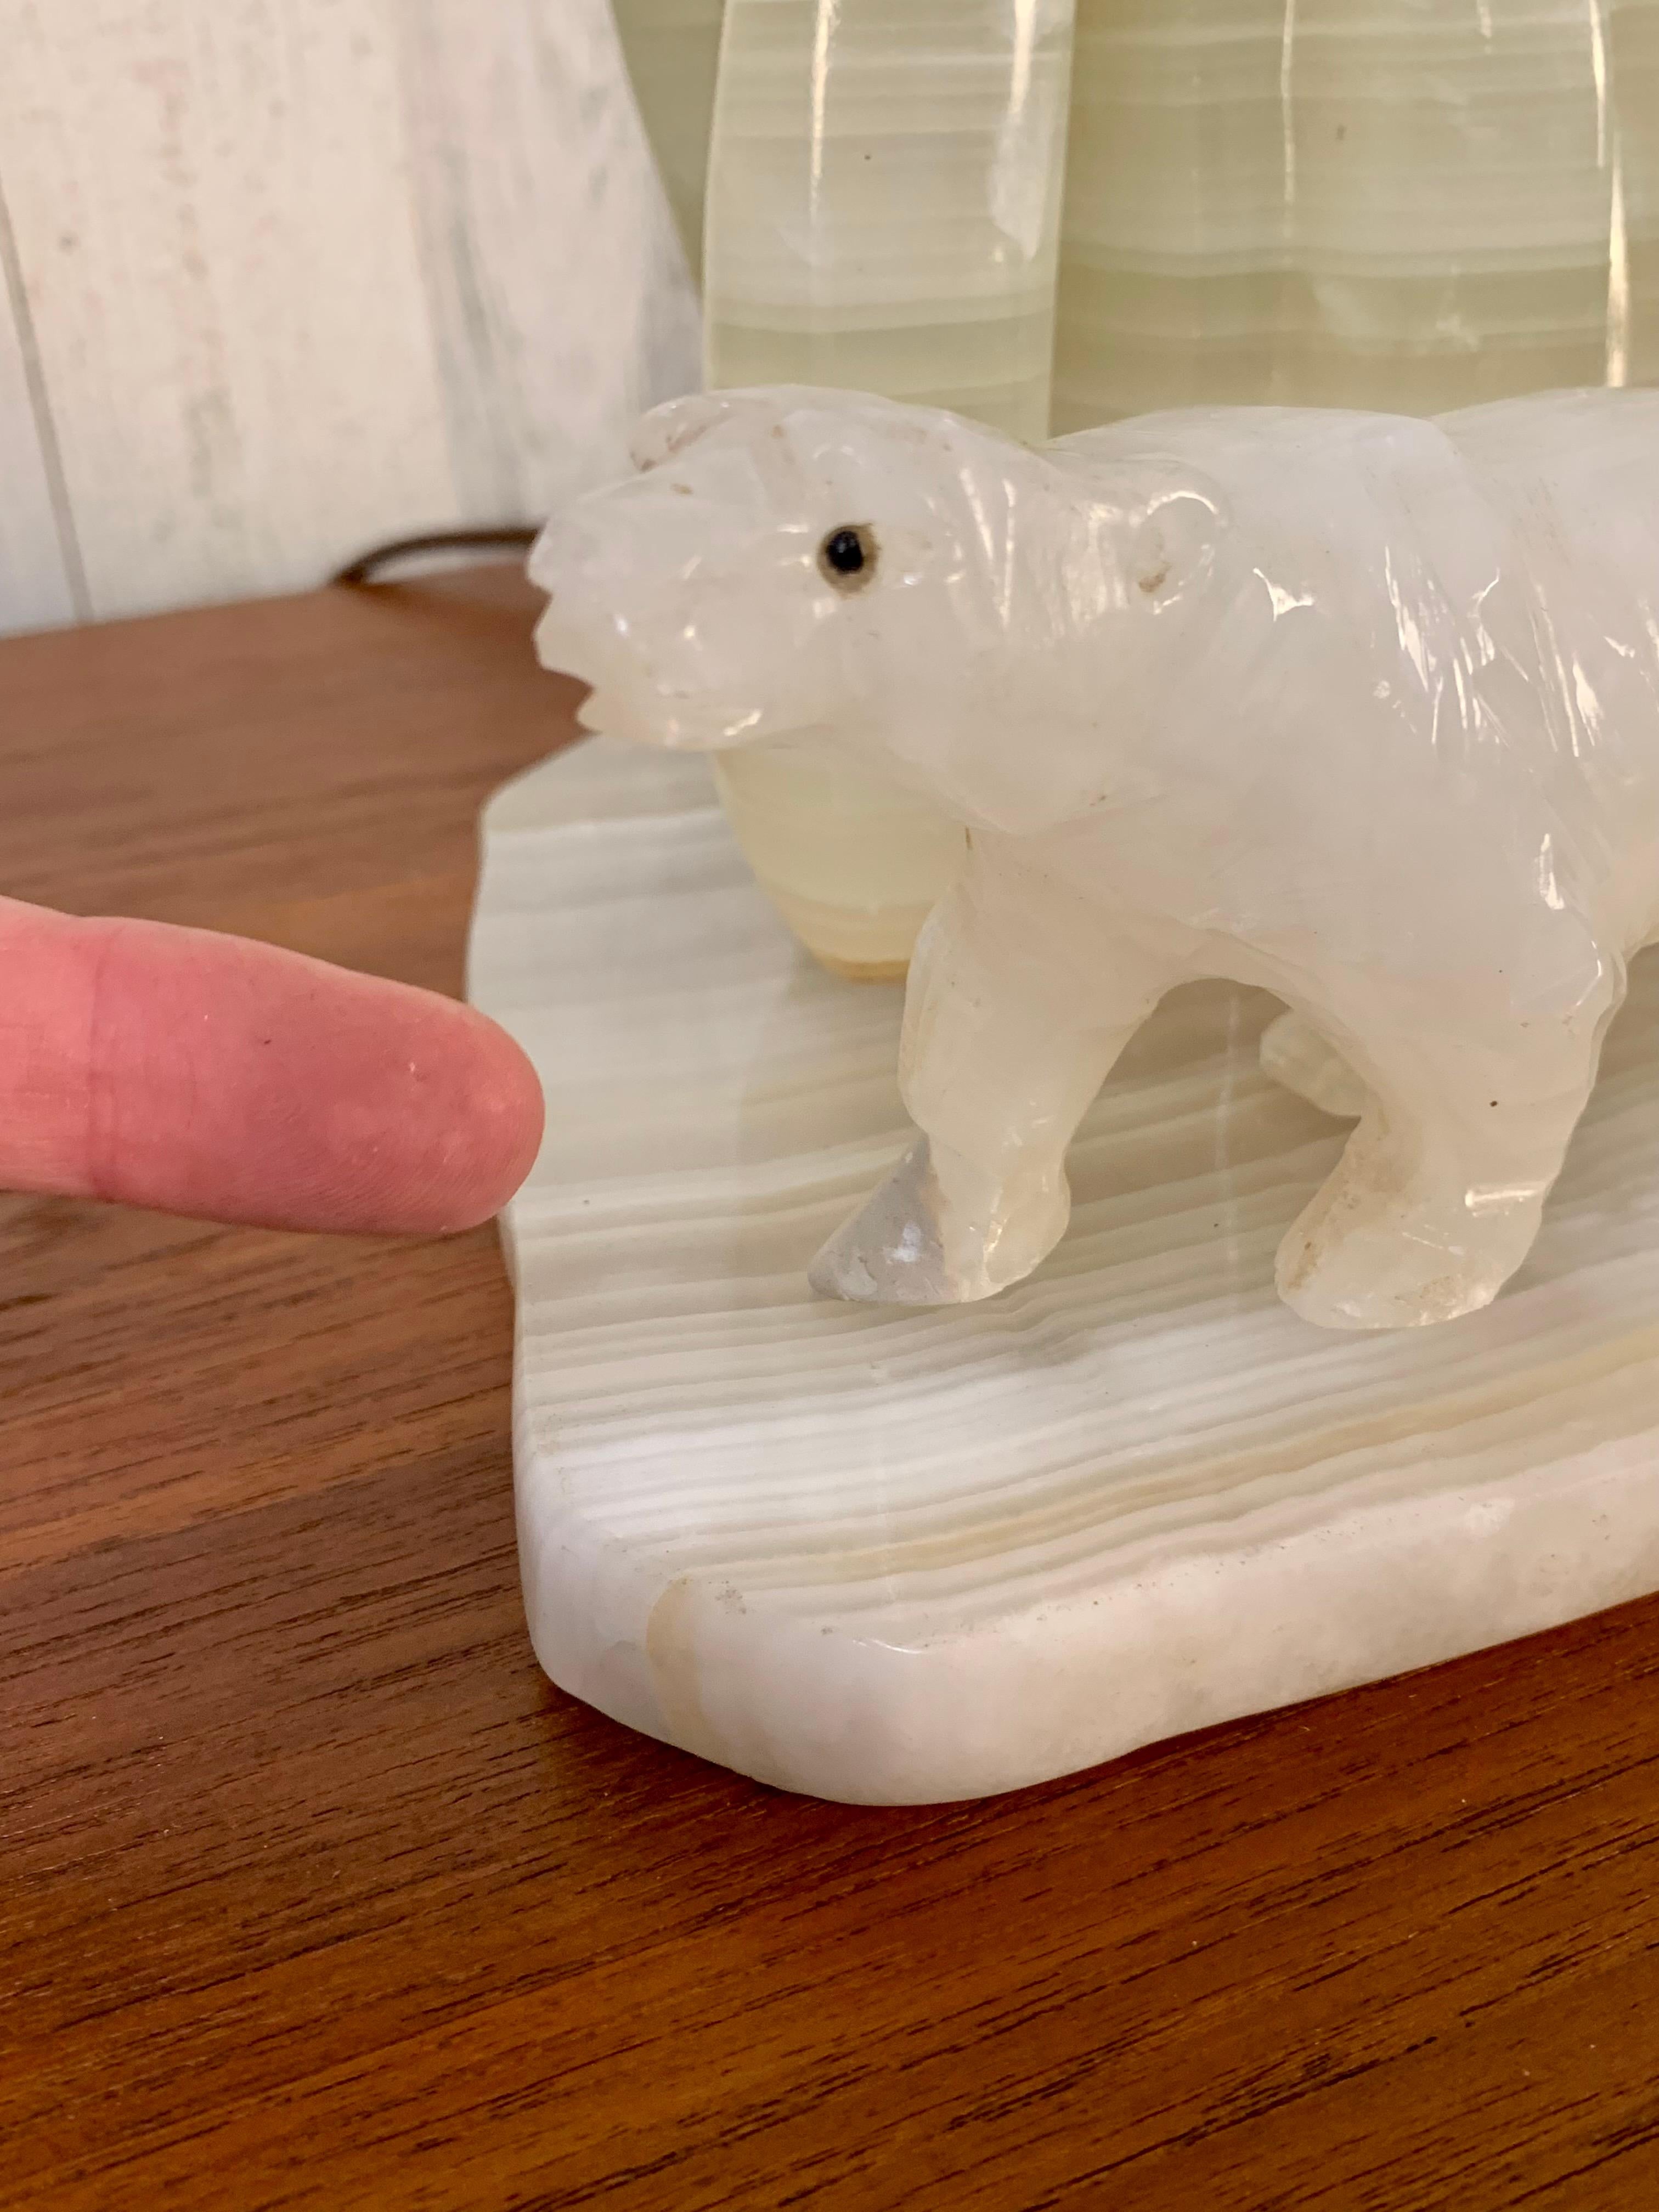 White and green onyx carved into an iceberg with one bear looking down on another bear.
One small light bulb illuminates from the inside.